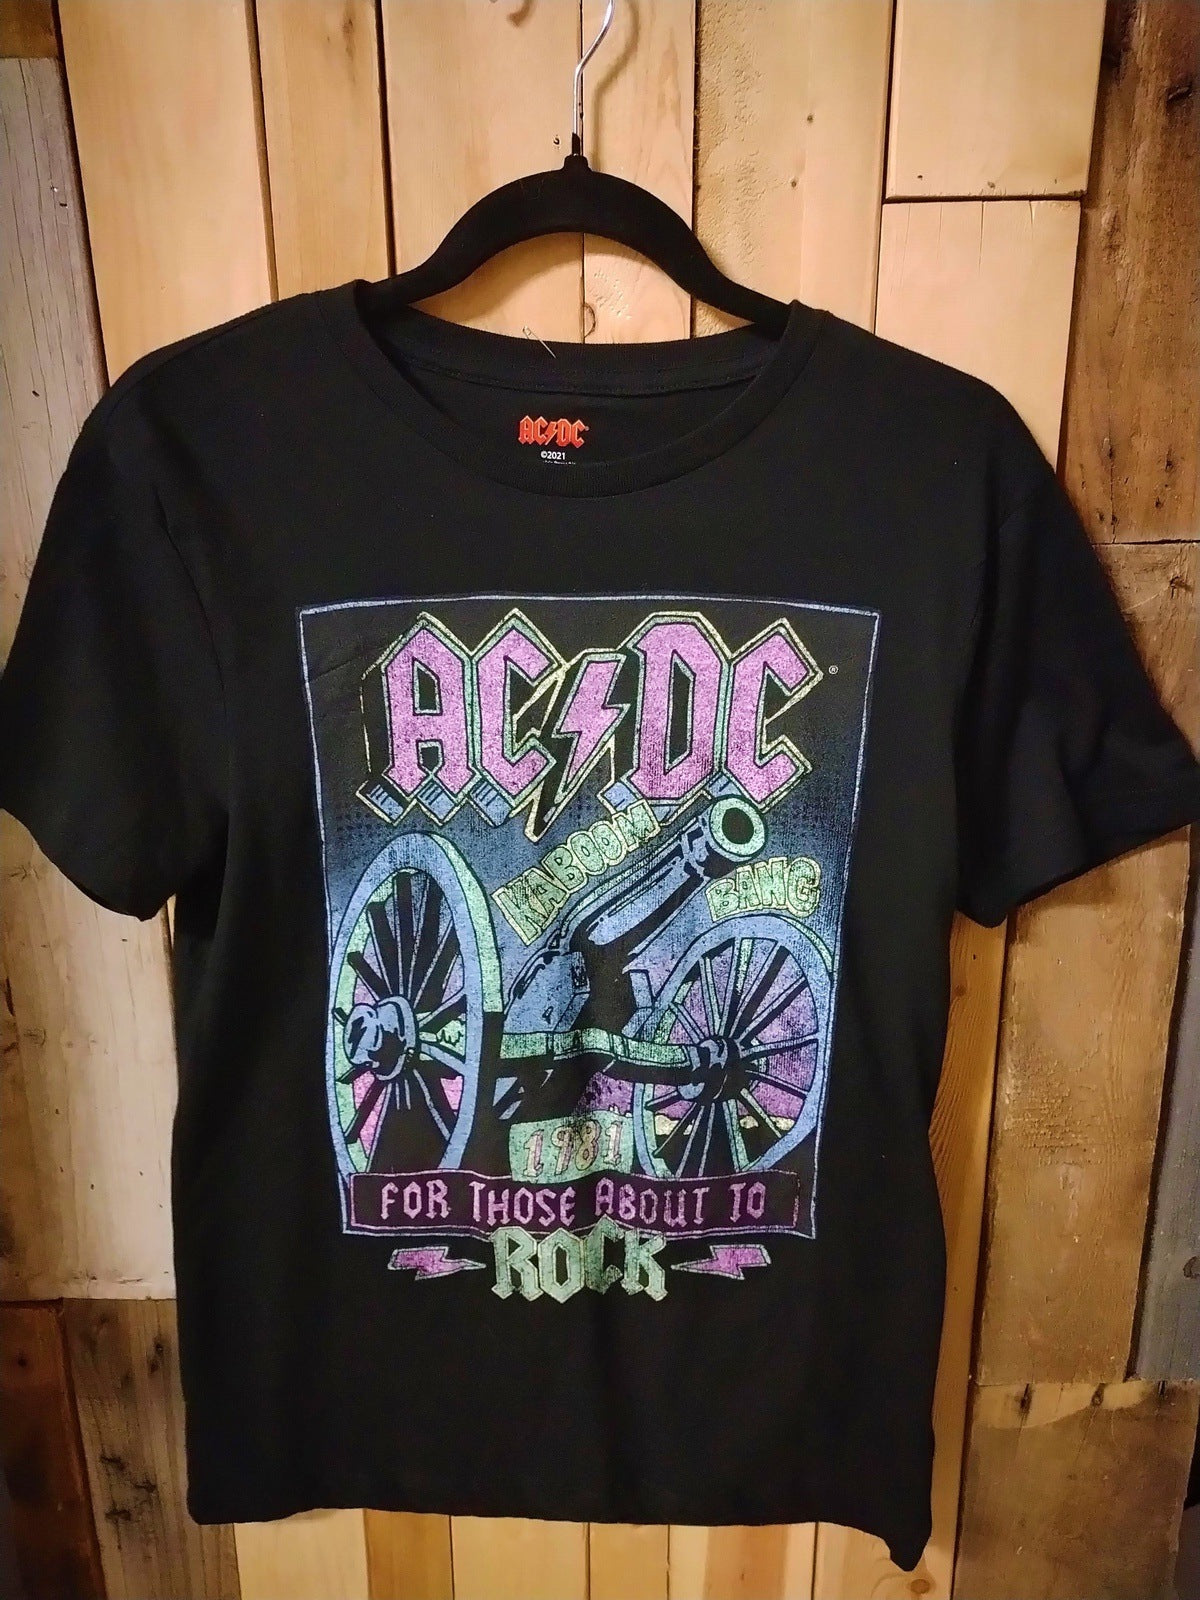 ACDC Official Merchandise "For Those About to Rock" Women's T Shirt Size Small